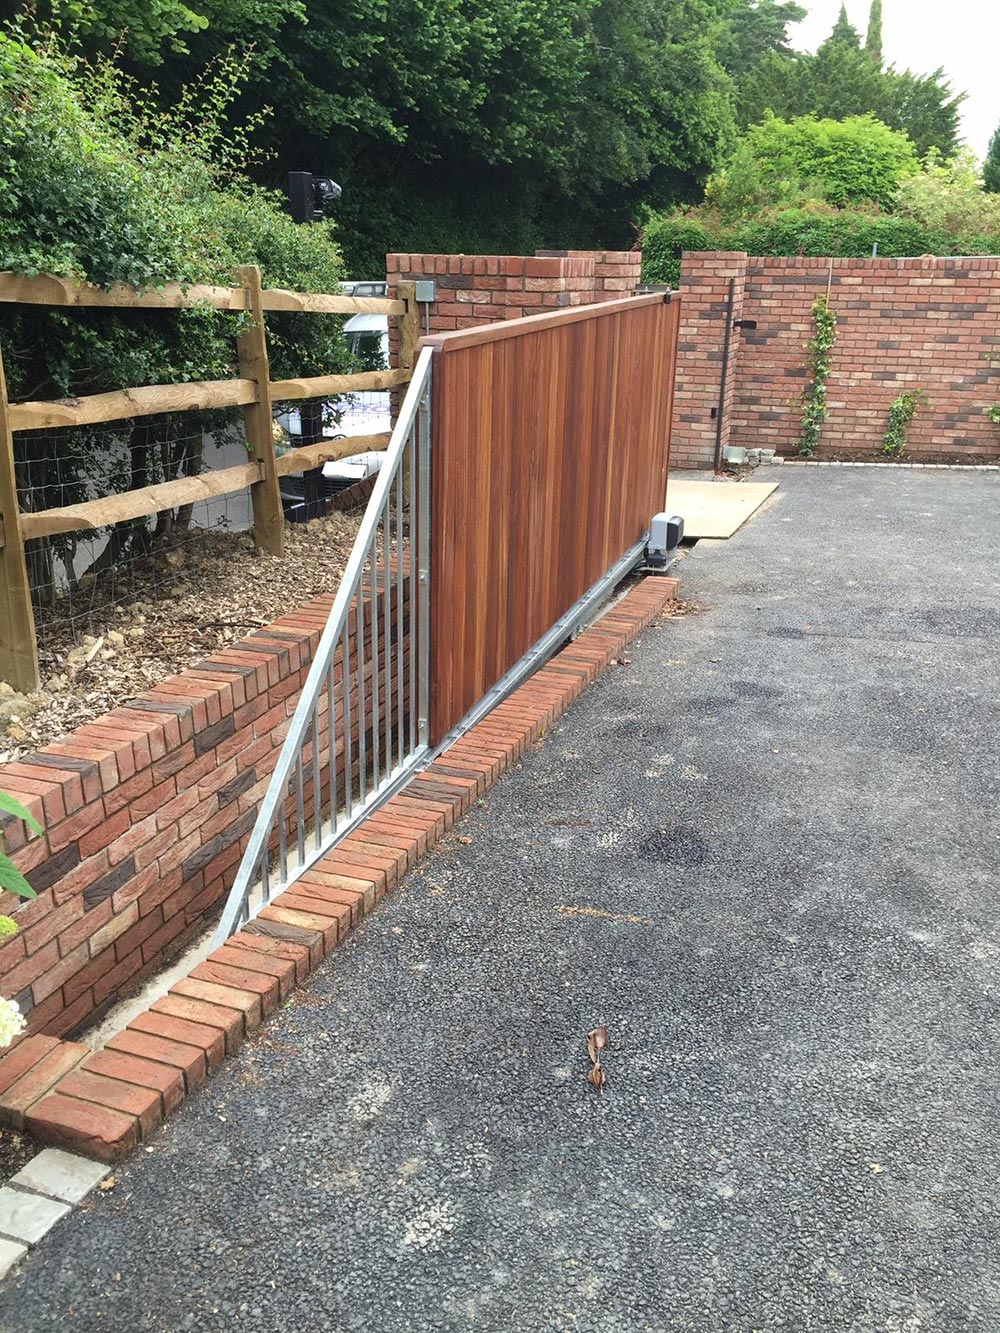 A wooden gate on a driveway with a brick wall - Patron Security Ltd